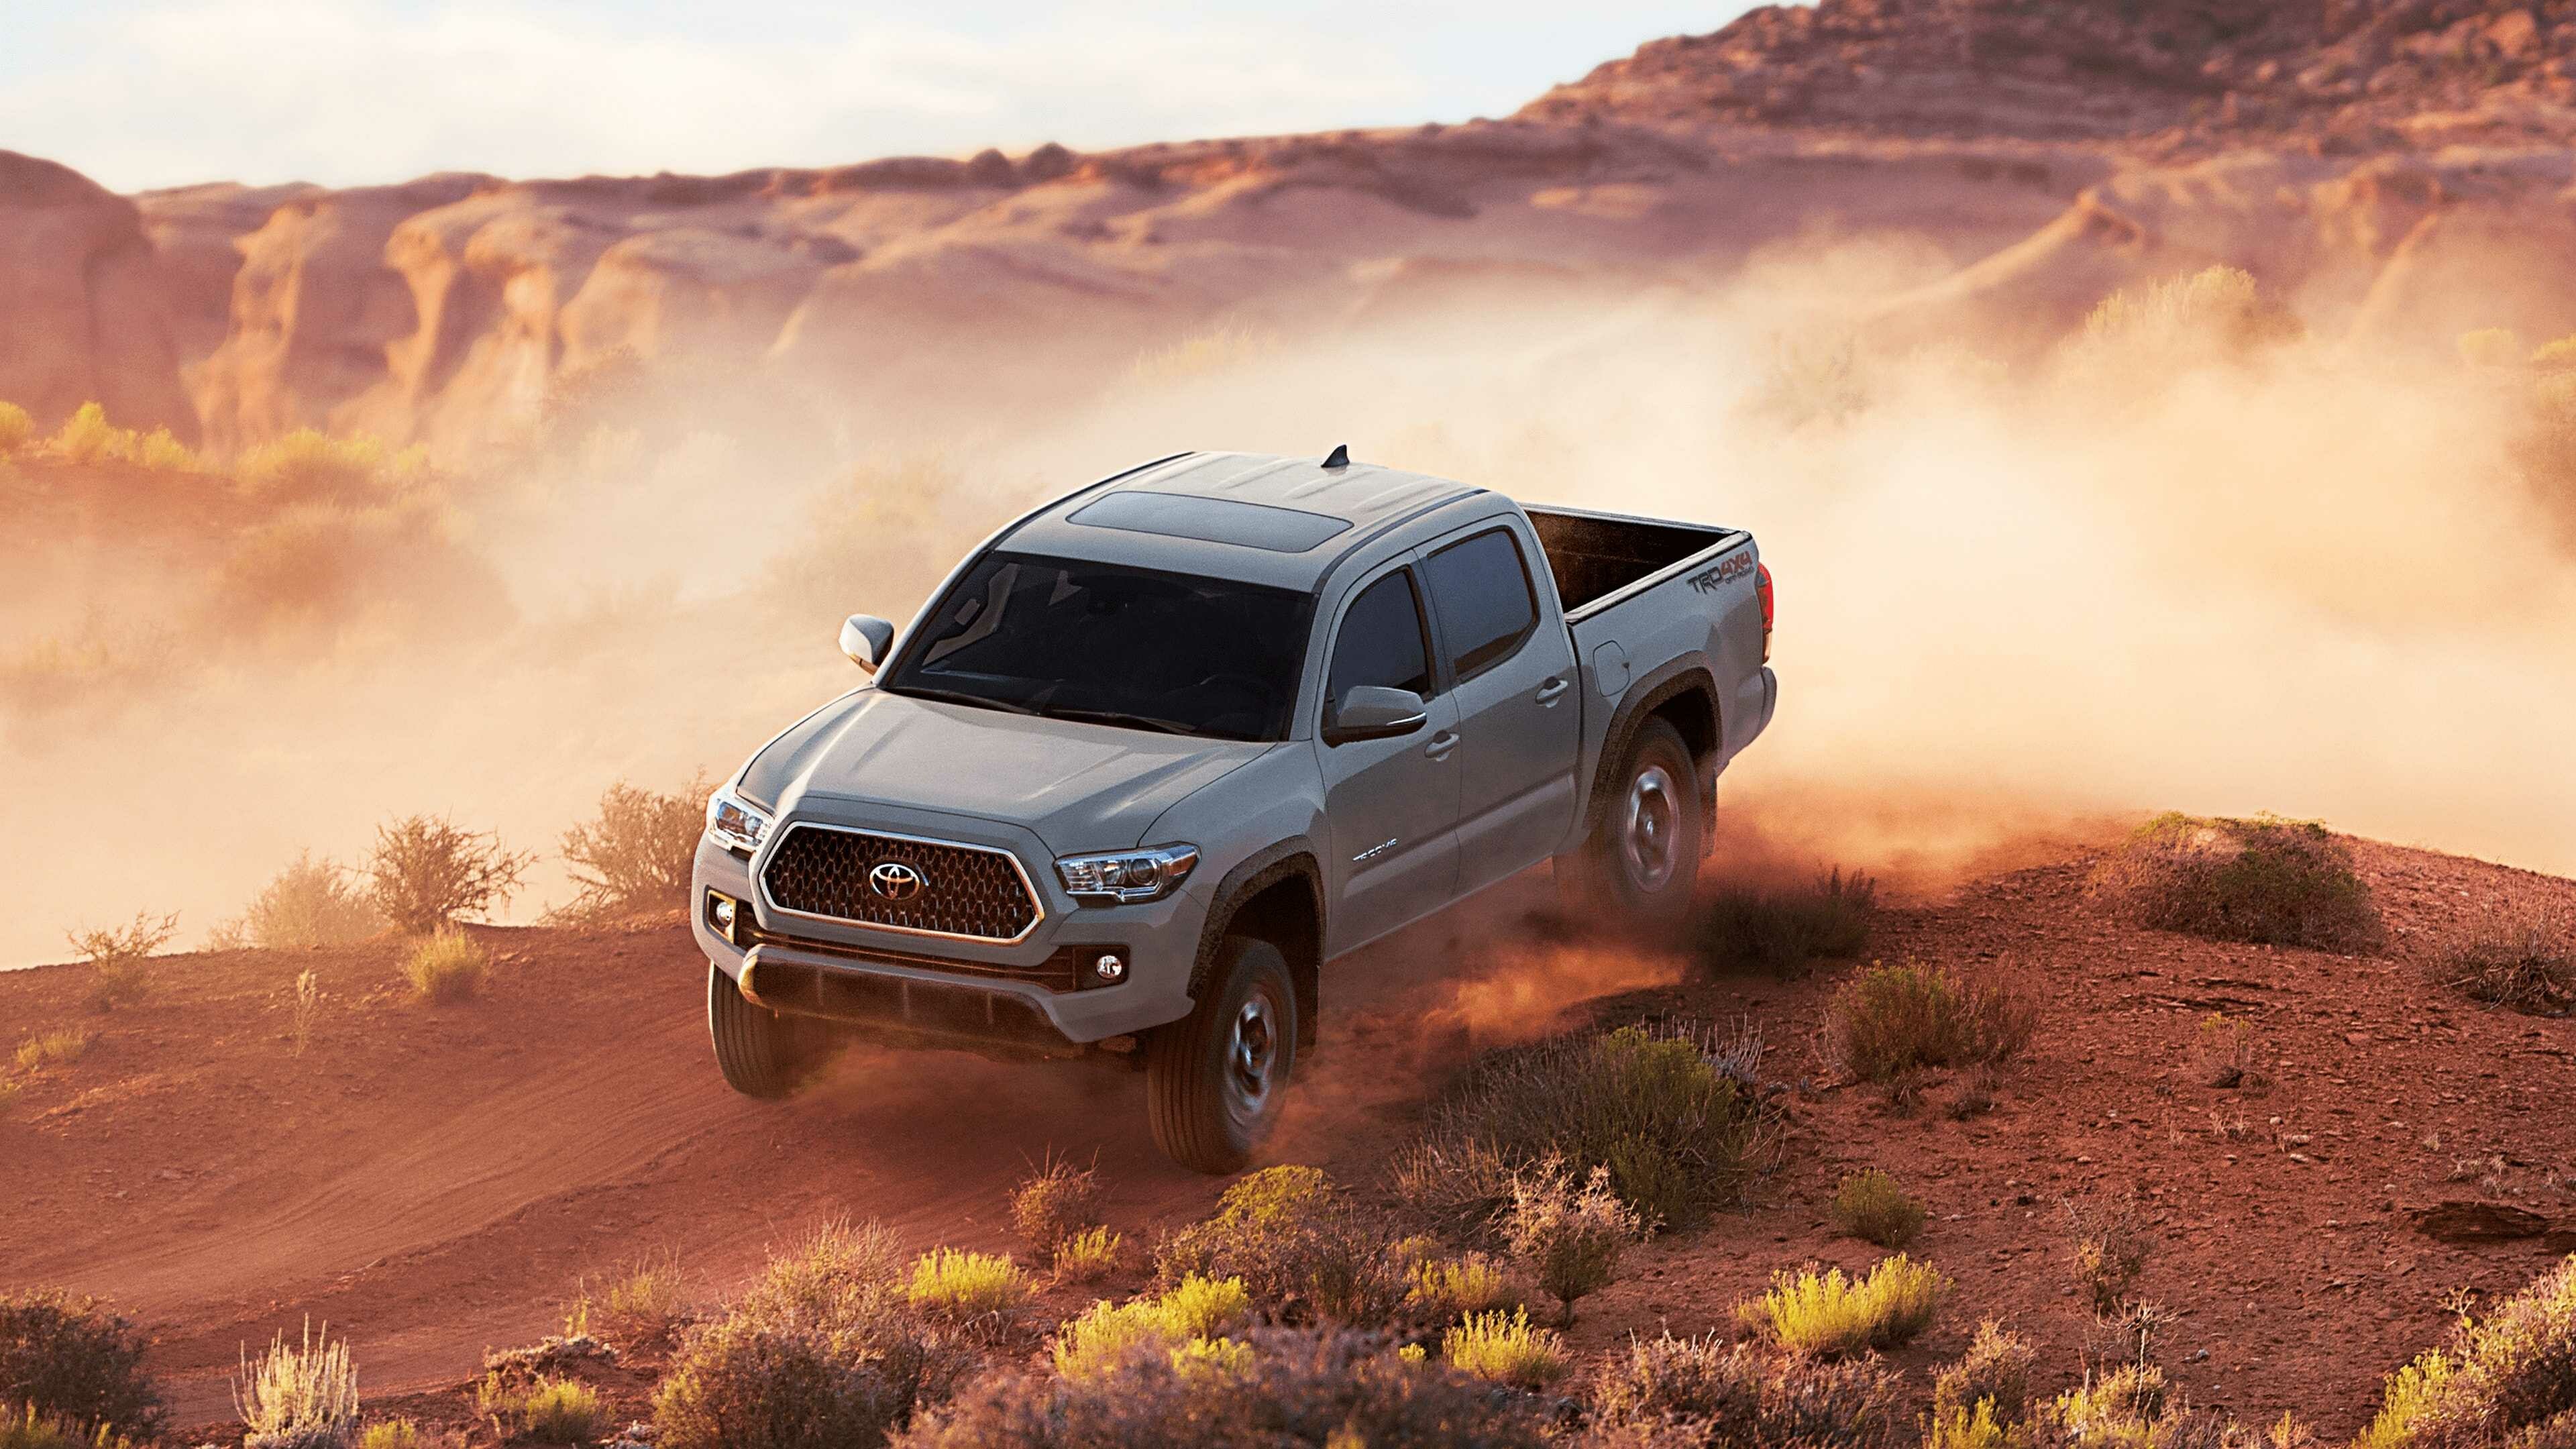 Toyota Tacoma: A pickup truck manufactured by the automobile manufacturer since 1995. 3840x2160 4K Background.